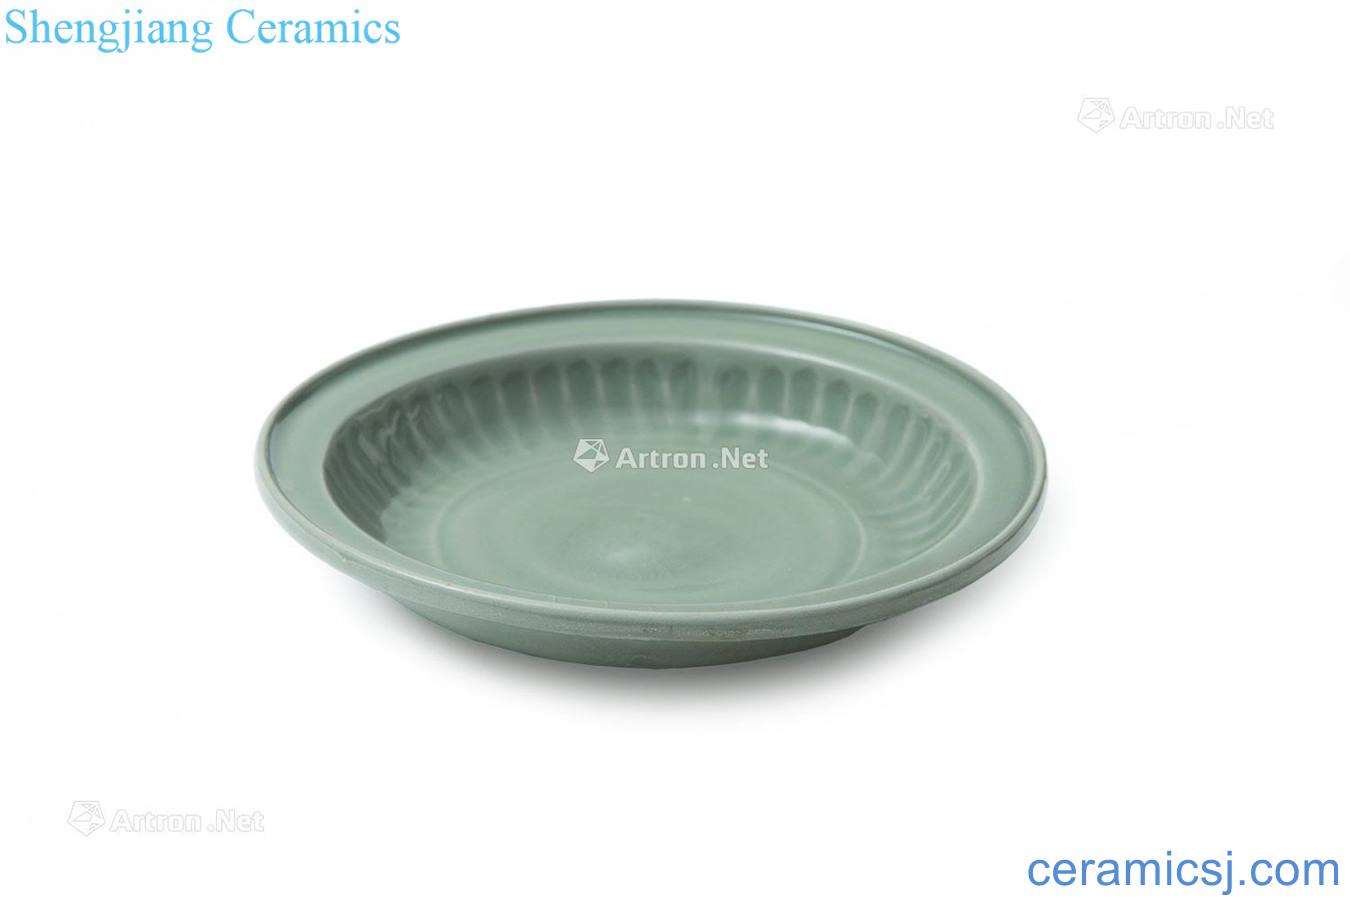 The southern song dynasty Longquan celadon lotus valve tray